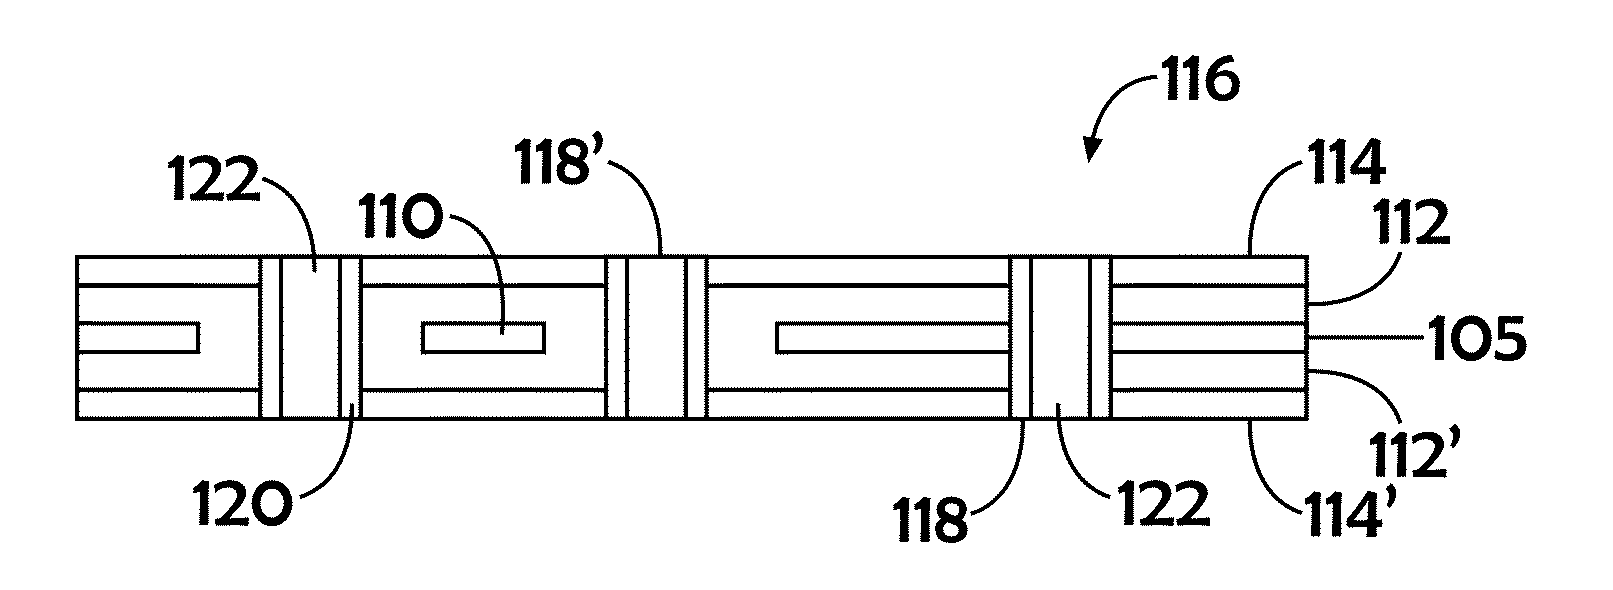 Electrically conductive adhesive (ECA) for multilayer device interconnects